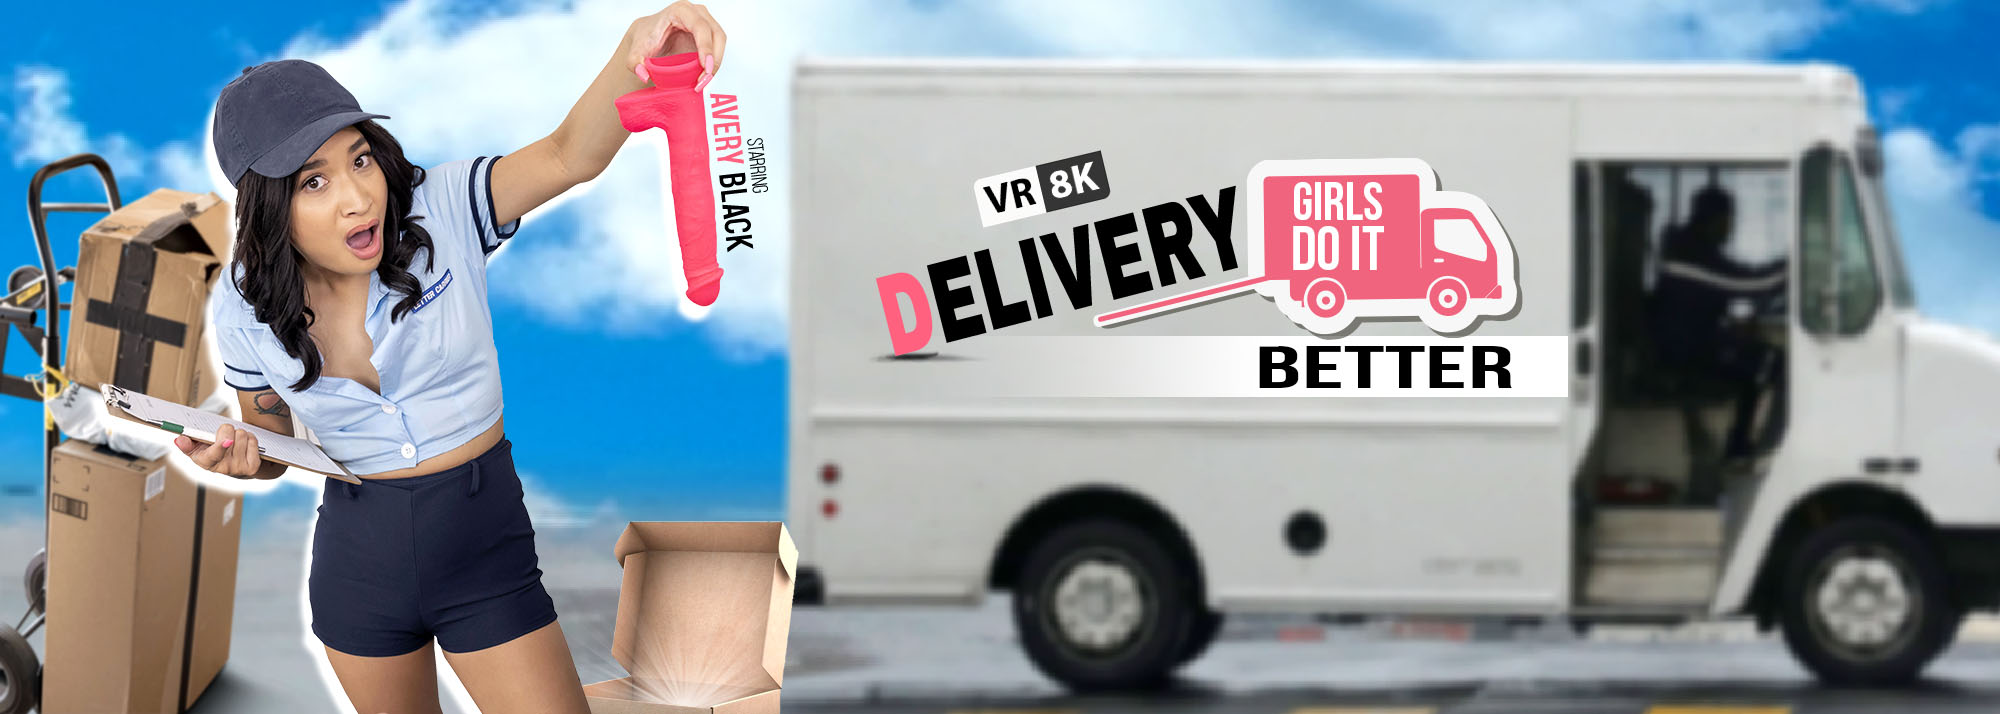 Delivery Girls Do It Better - VR Porn Video, Starring: Avery Black